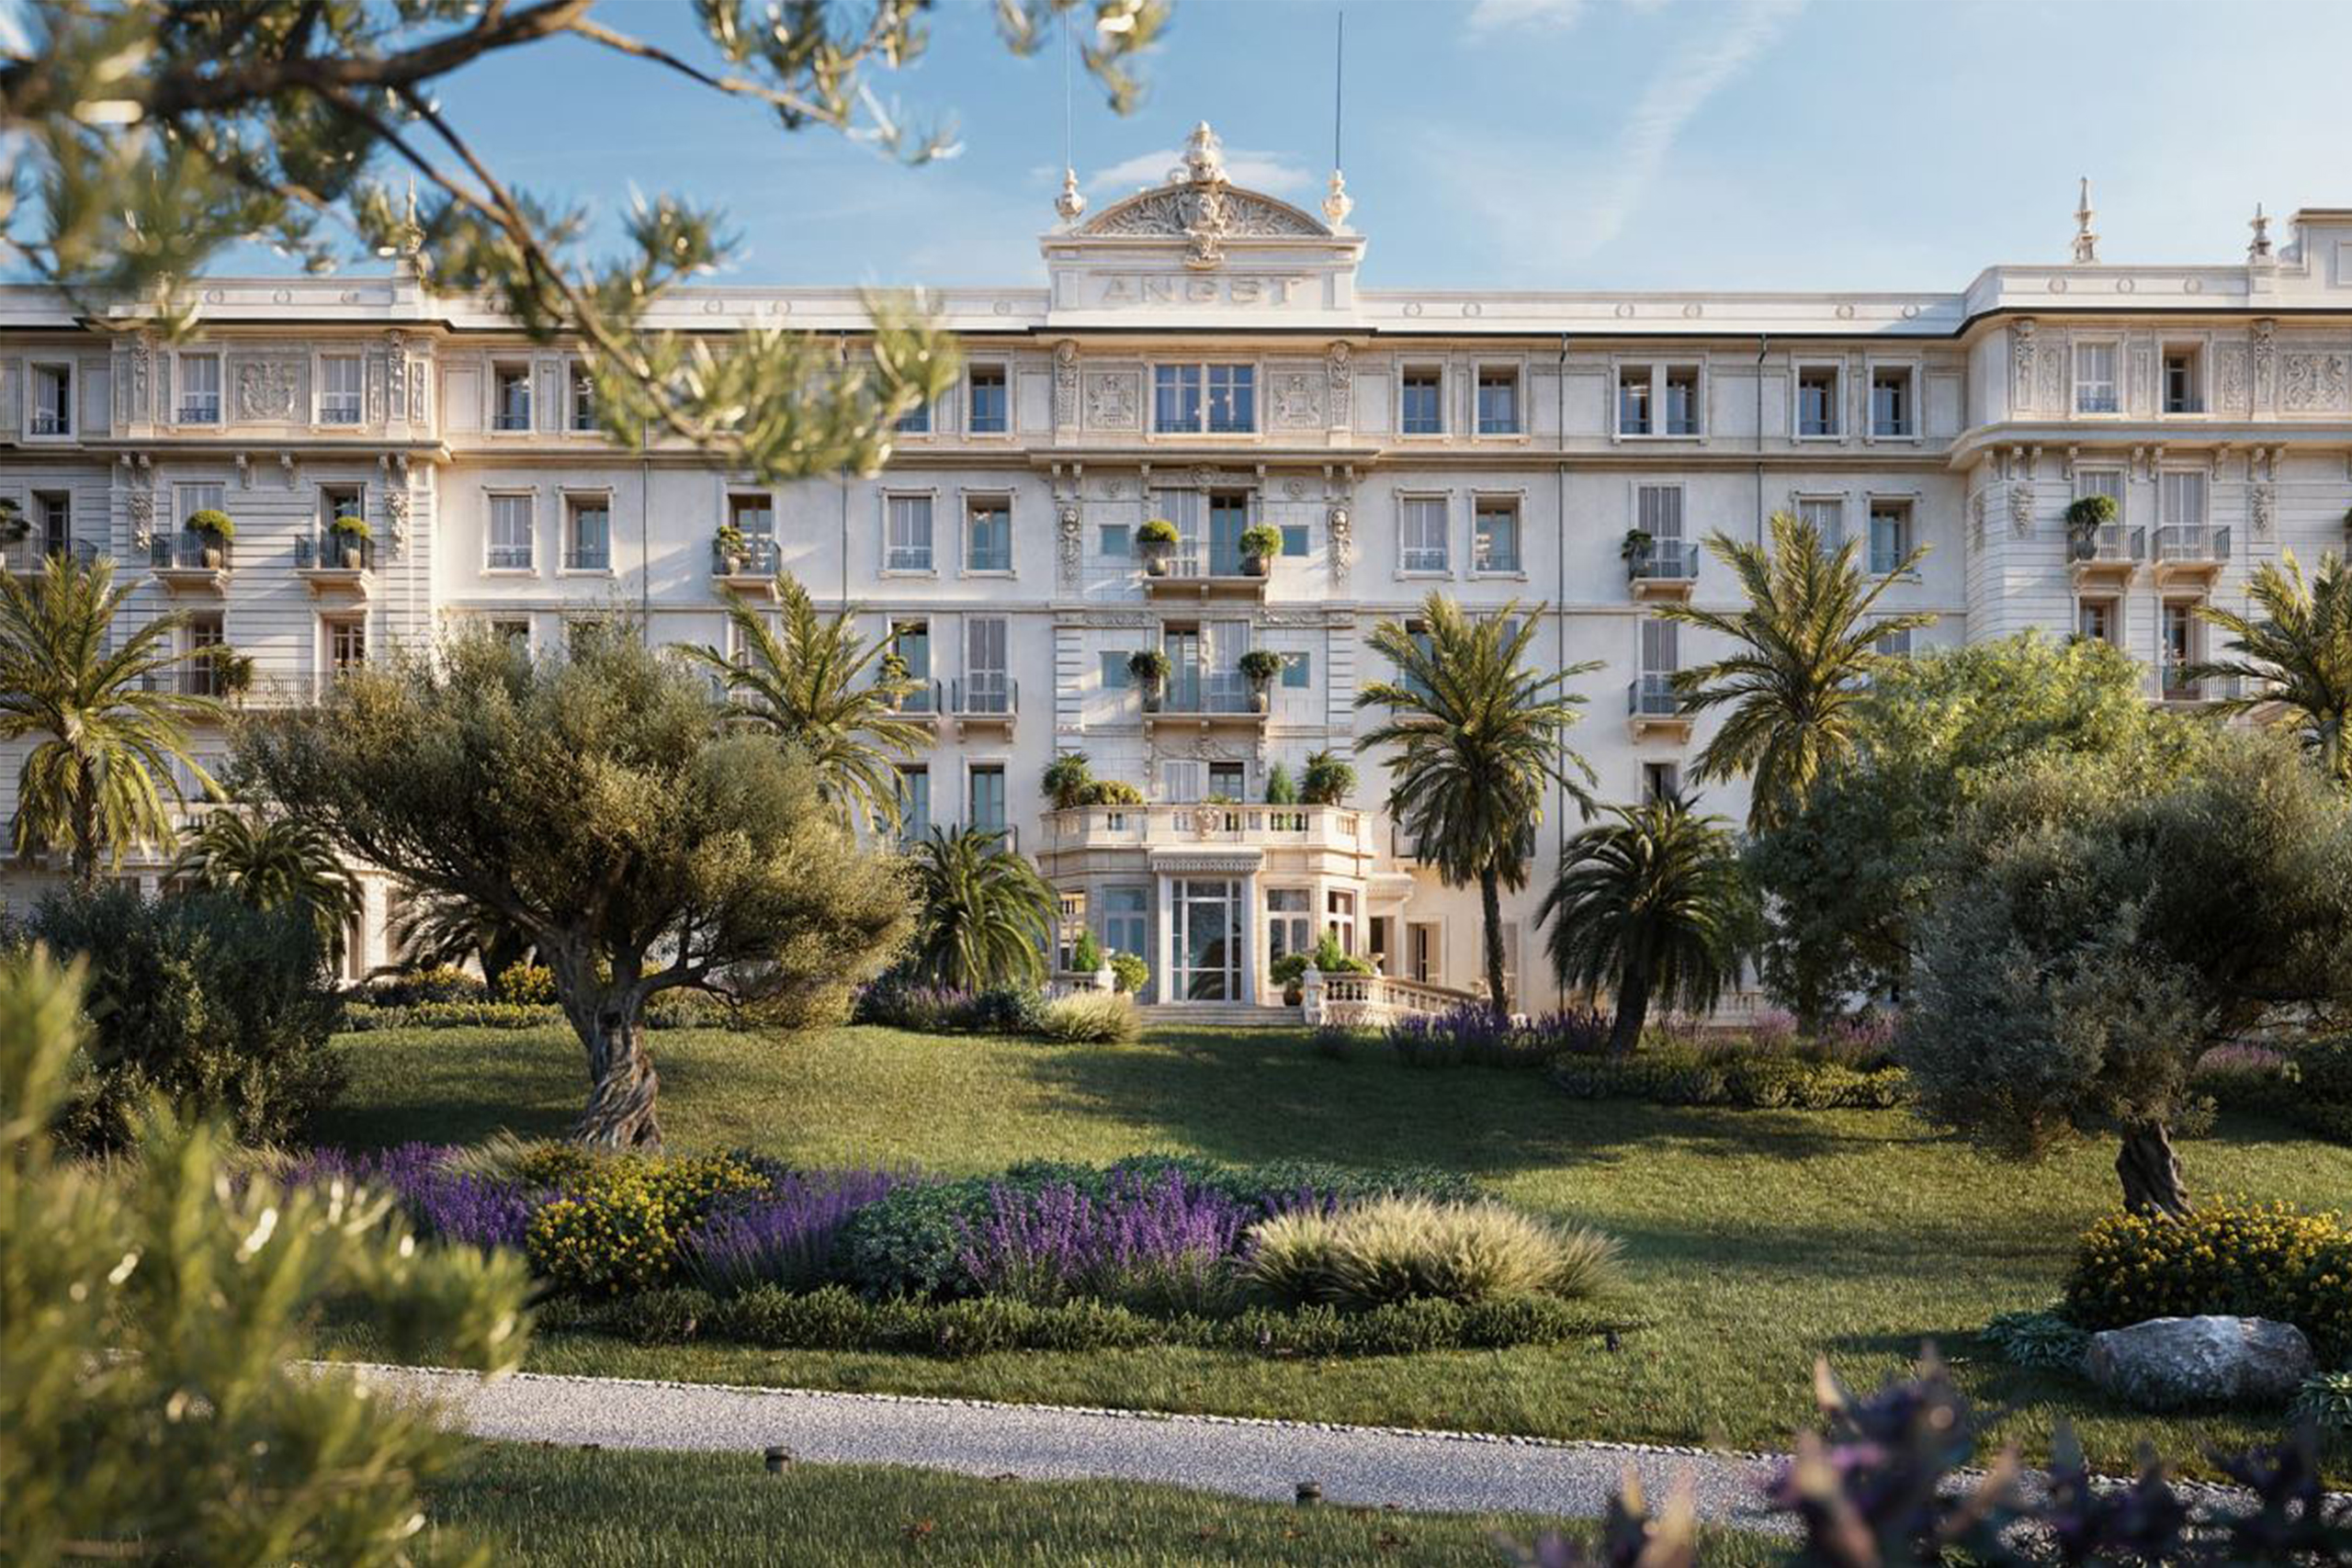 Project for restoration and re-functionalization of former Hotel Angst in Bordighera